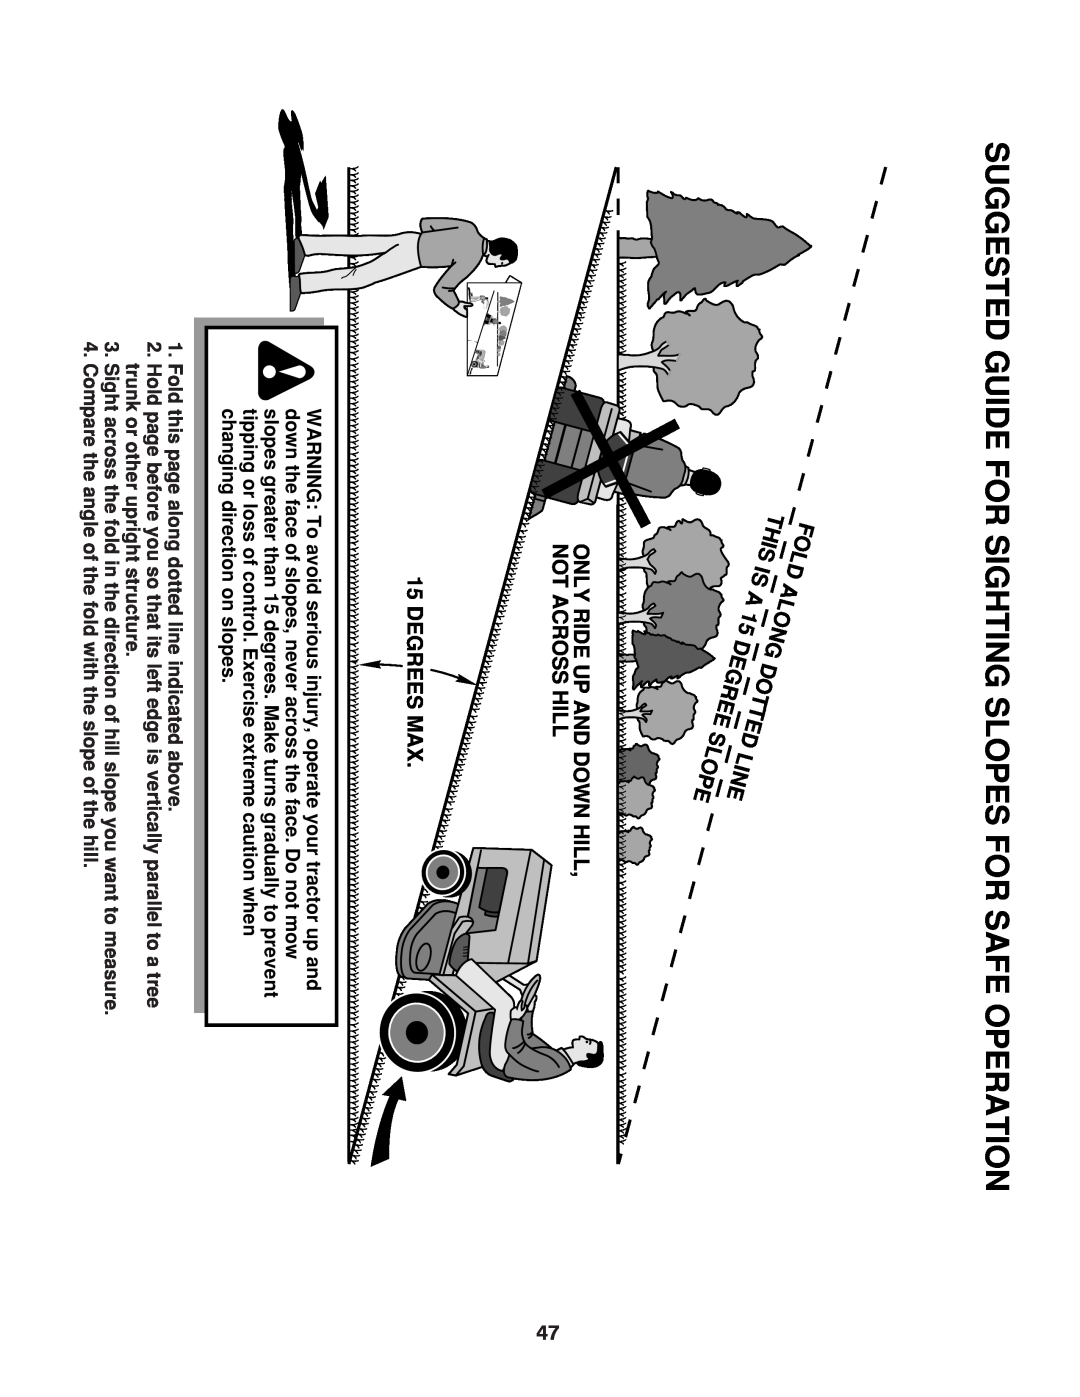 Poulan pb19546lt manual Suggested Guide For Sighting Slopes For Safe Operation 